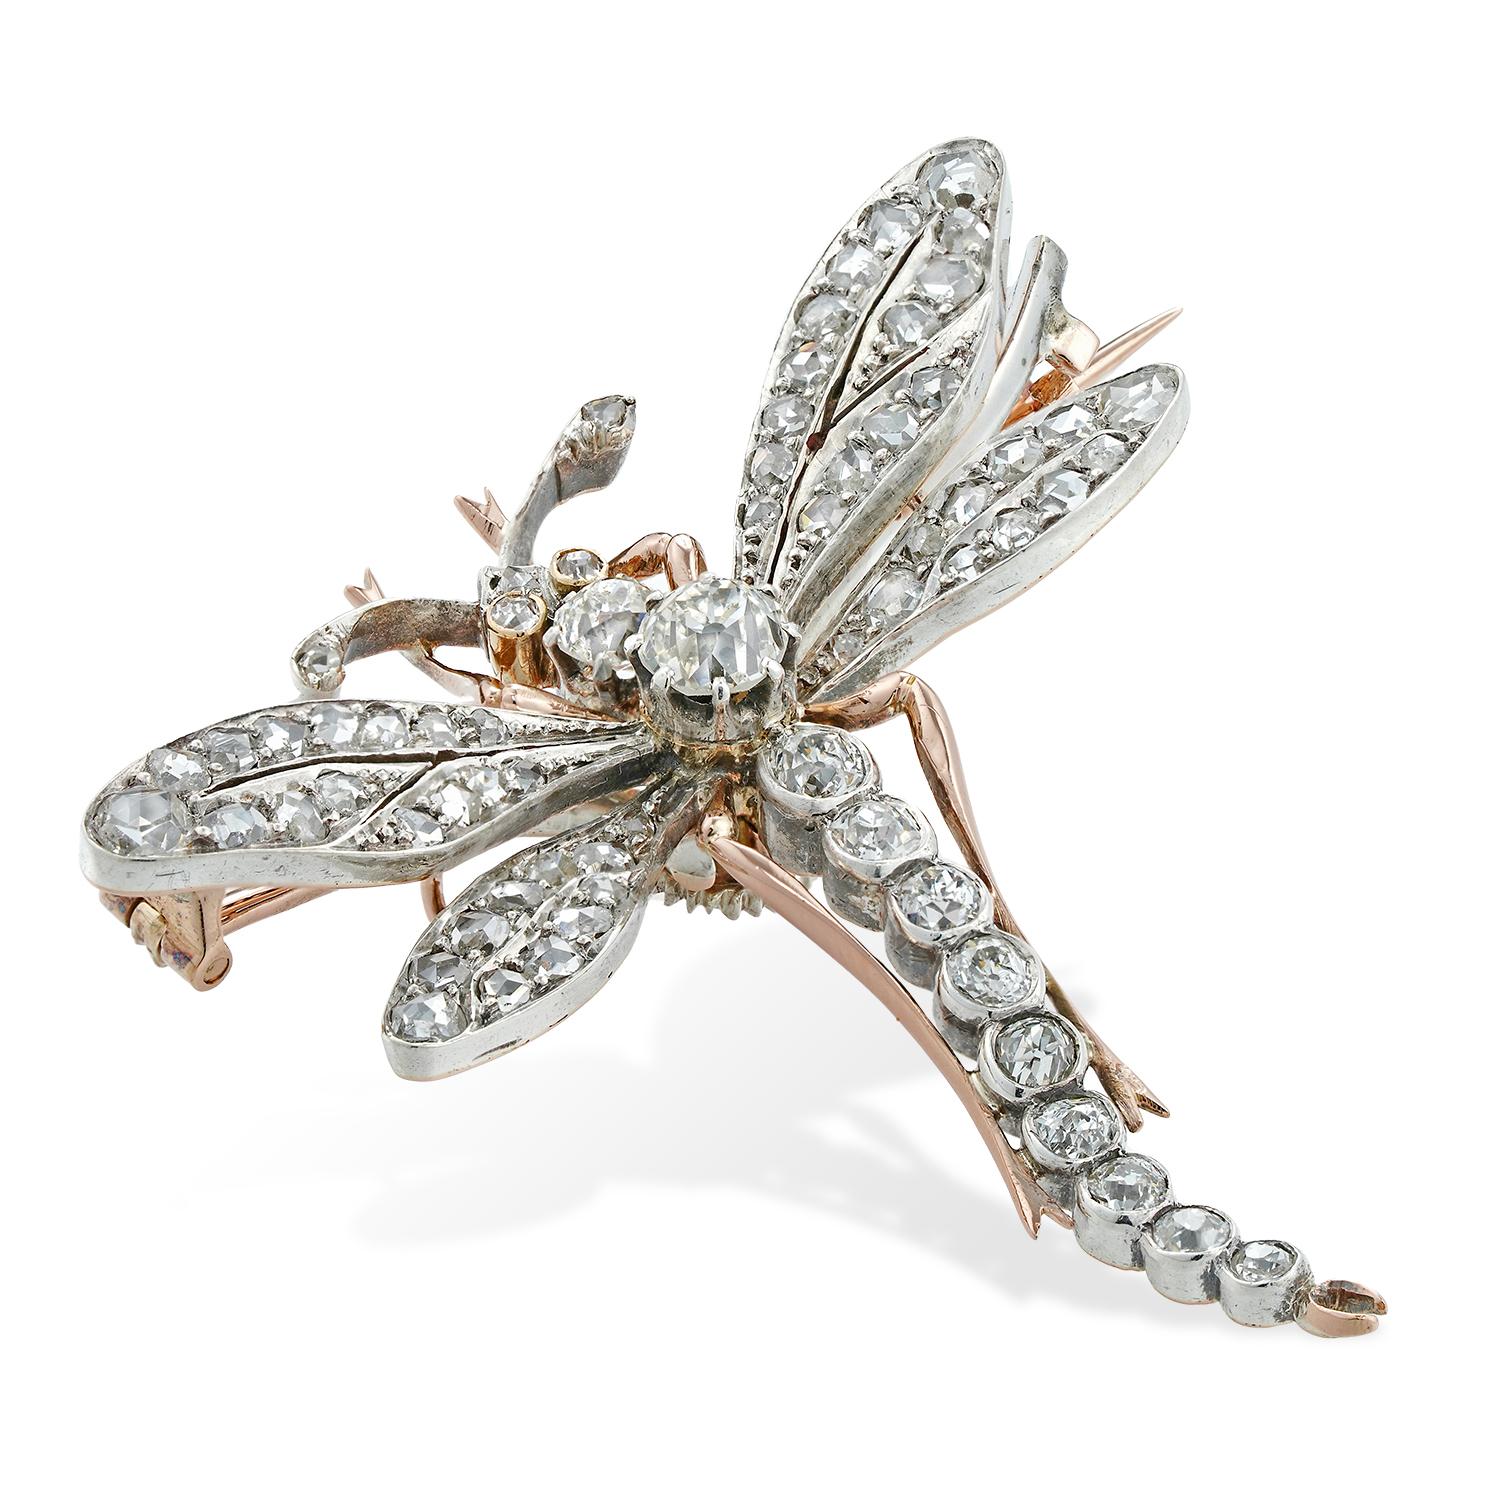 A Belle Epoque diamond-set dragonfly brooch, the body and the head set with fourteen old European-cut diamonds, the wings set with fifty-two rose-cut diamonds, the diamonds estimated to weigh 3 carats in total, all mounted in silver to yellow-gold